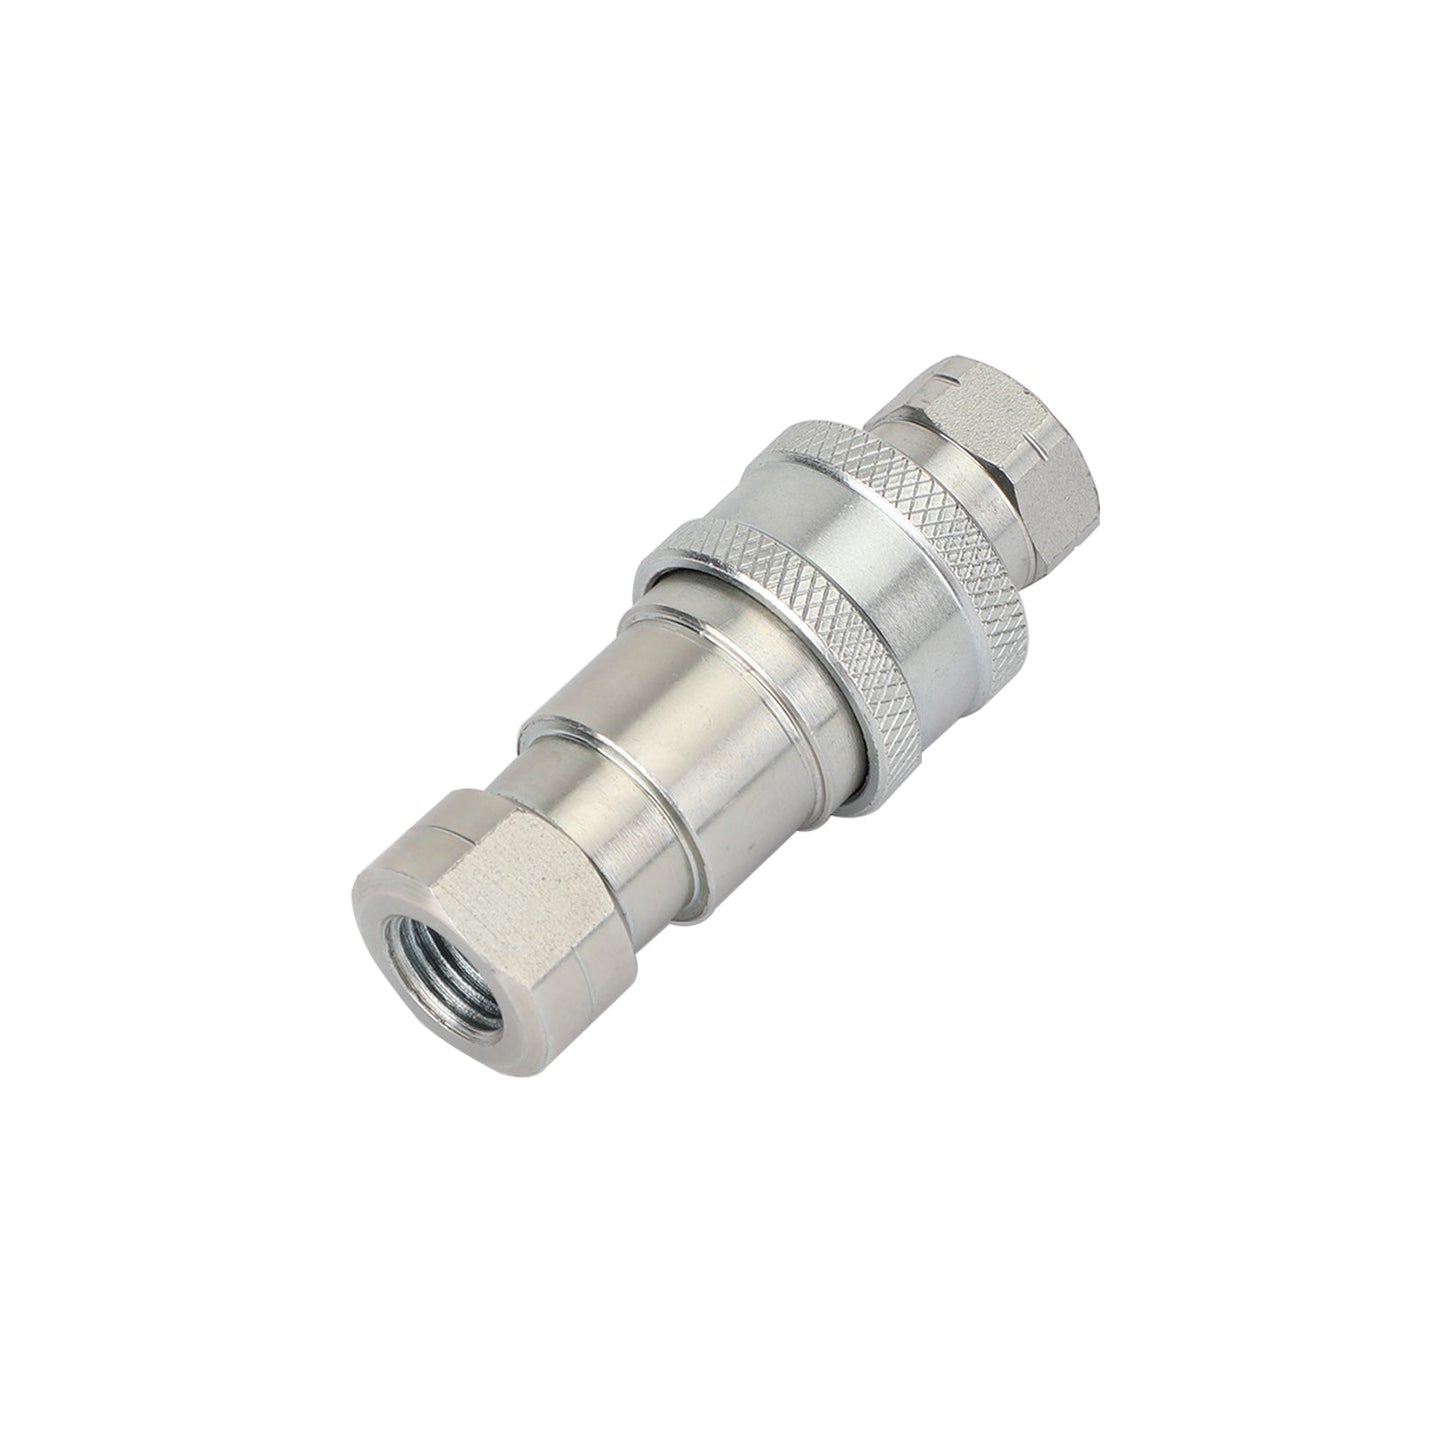 1 Sets 1/4" NPT ISO 7241-B Quick Disconnect Hydraulic Couplings / Couplers